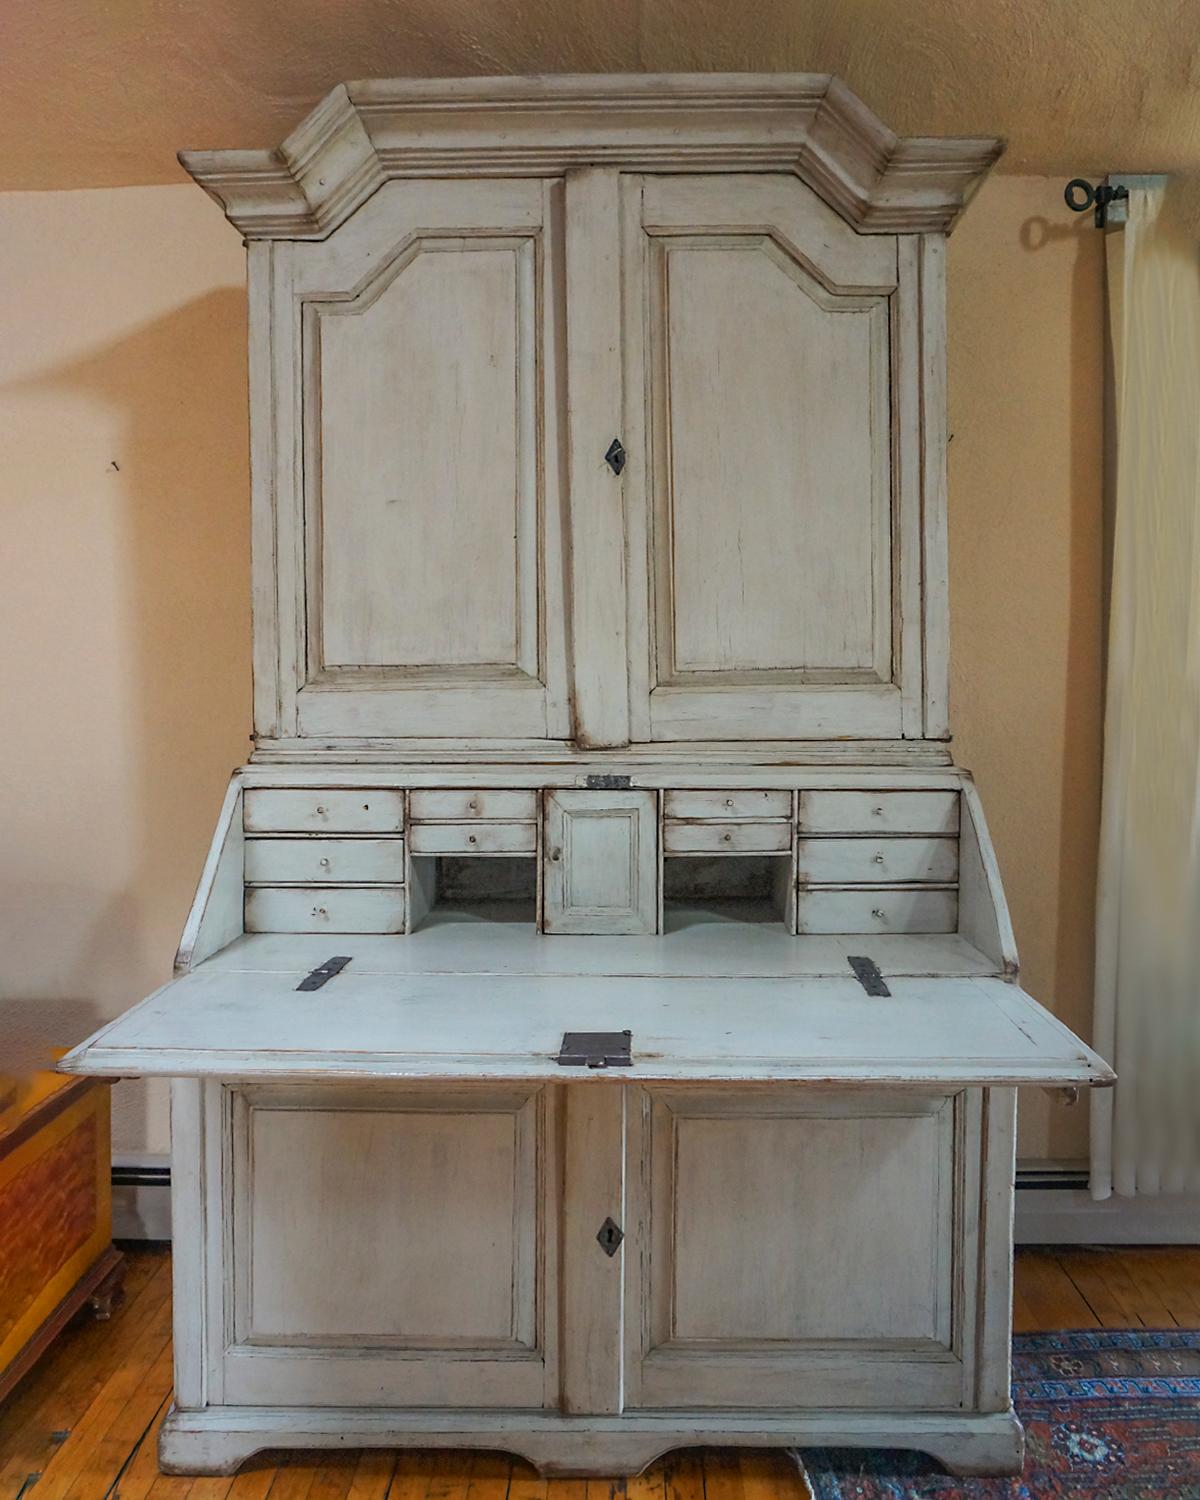 Early Swedish secretary, circa 1800, in two parts. The upper section has a bold cornice with beautiful form over a pair of raised panel doors. Inside are three fixed shelves, the top one having a curved shape with notches for spoons. The lower